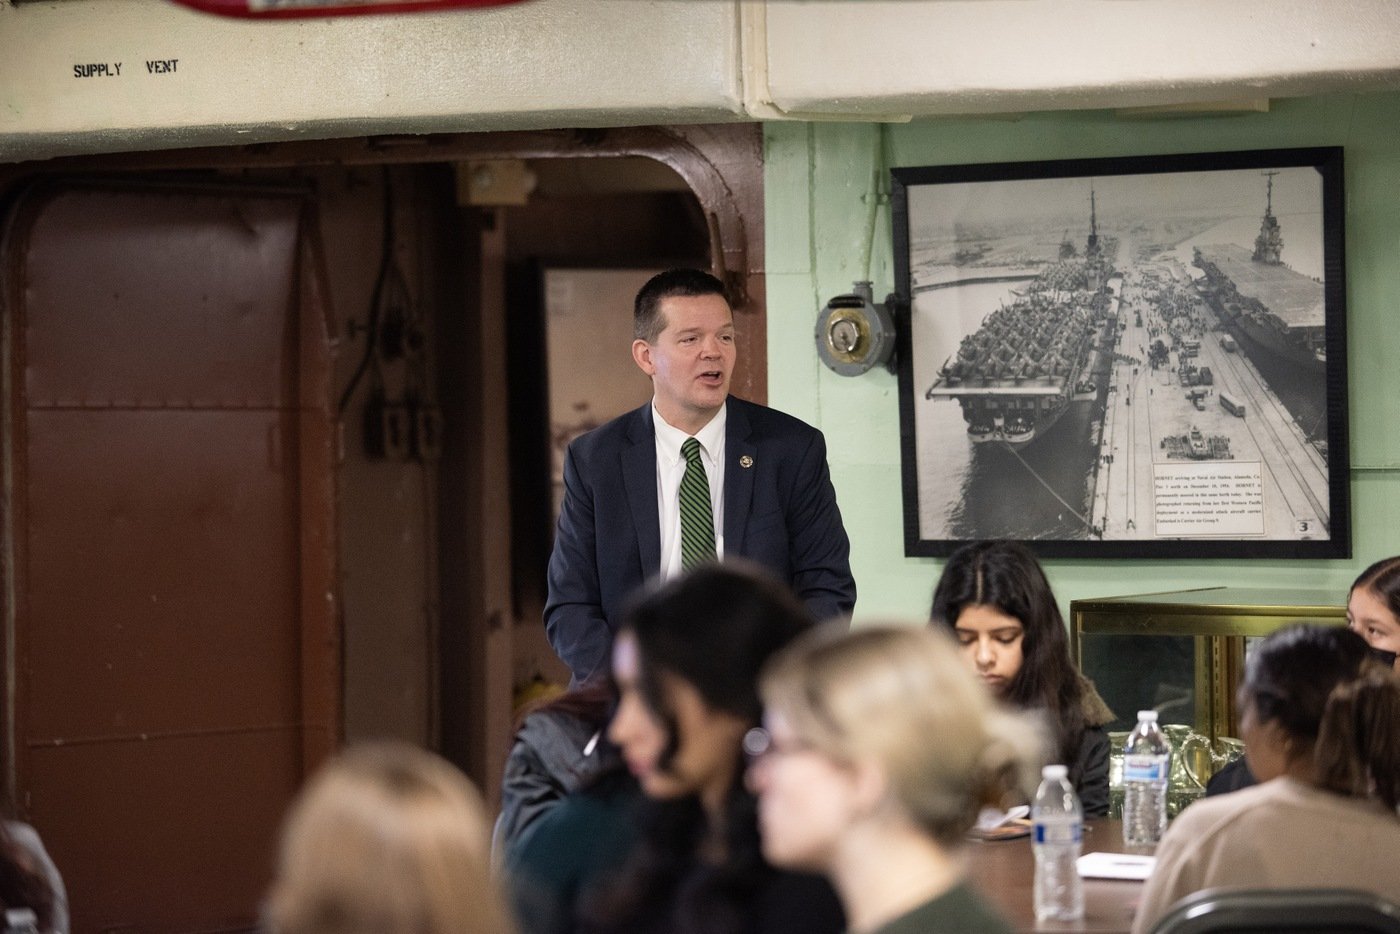 FBI San Francisco Assistant Special Agent in Charge Jonathan Blair presents to students in the wardroom of the USS Hornet during the field office's Summer 2023 Teen Academy in Alameda, California.